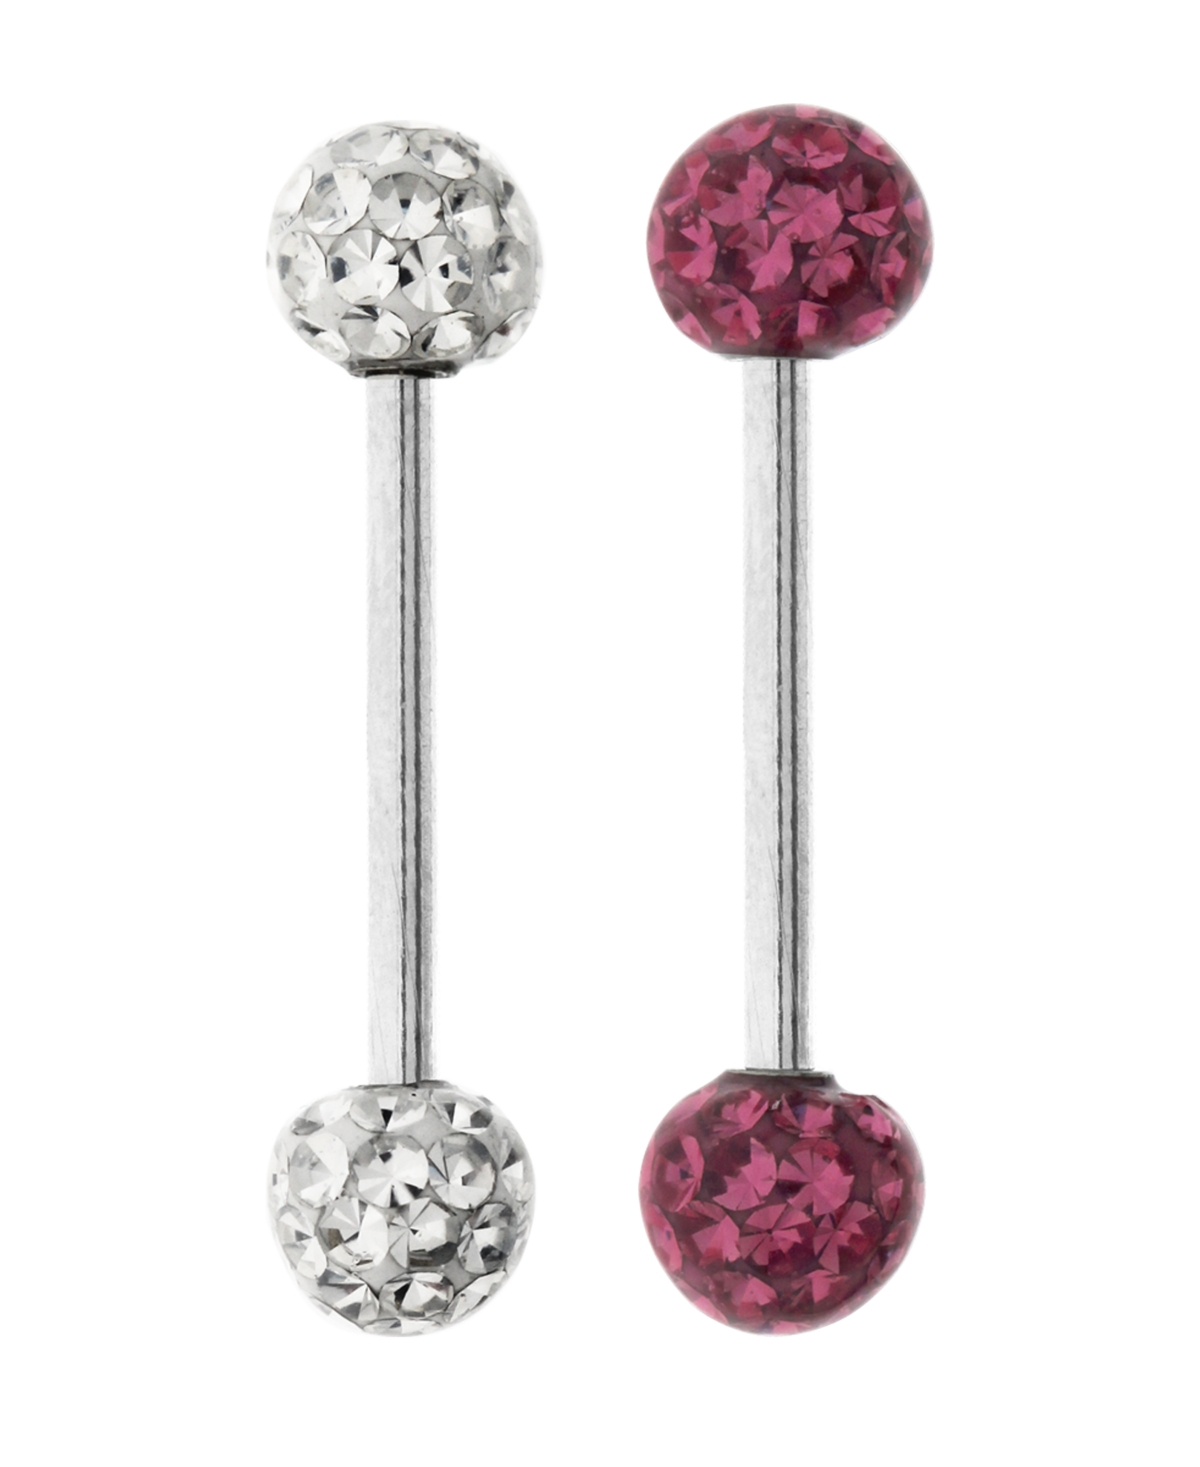 Bodifine Stainless Steel Set of 2 Crystal and Resin Tongue Bars - Asstd